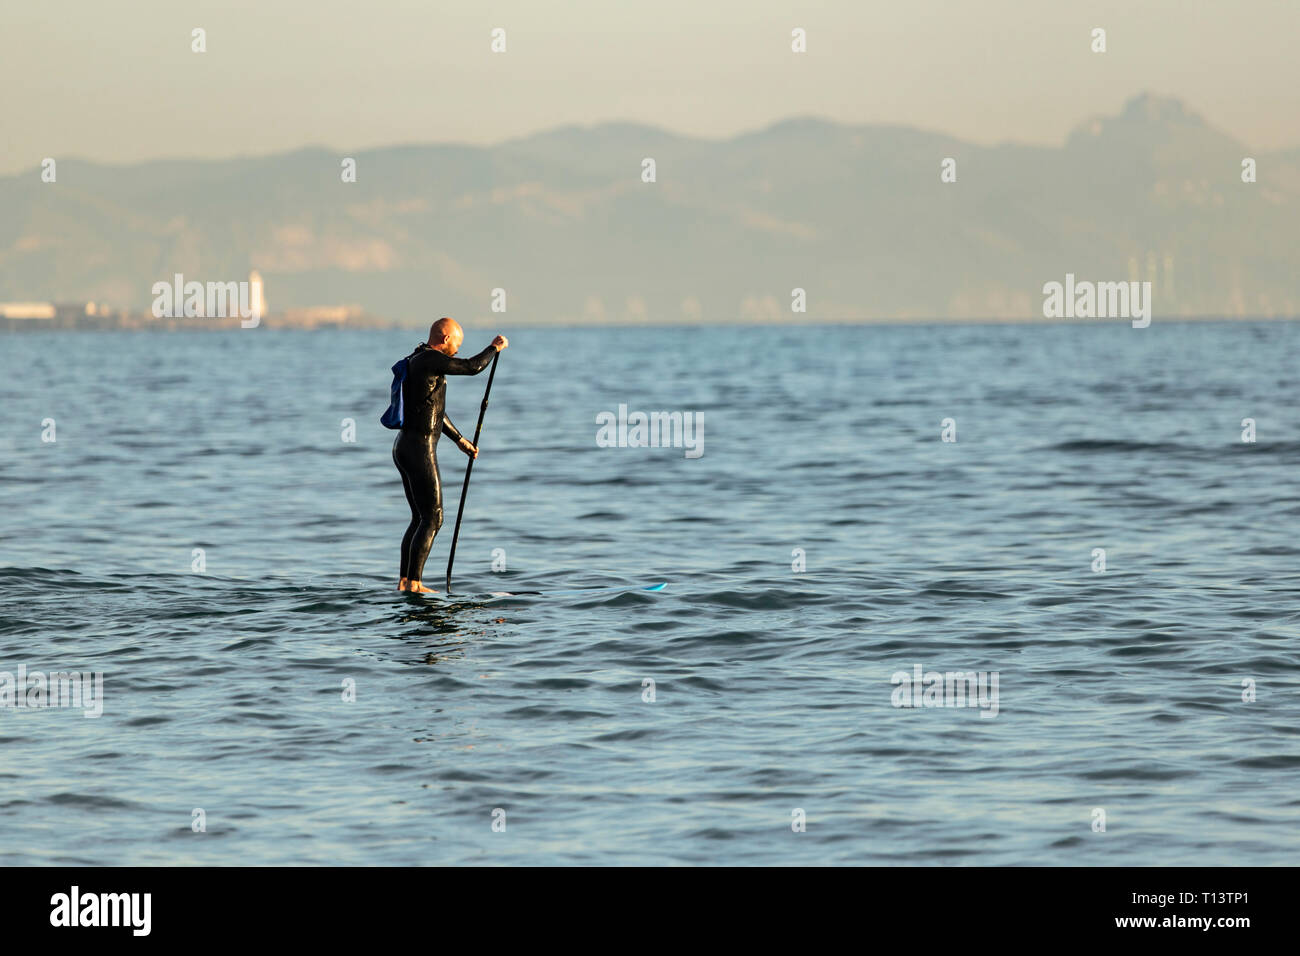 Spain, Andalusia, Tarifa, man stand up paddle boarding on the sea Stock Photo